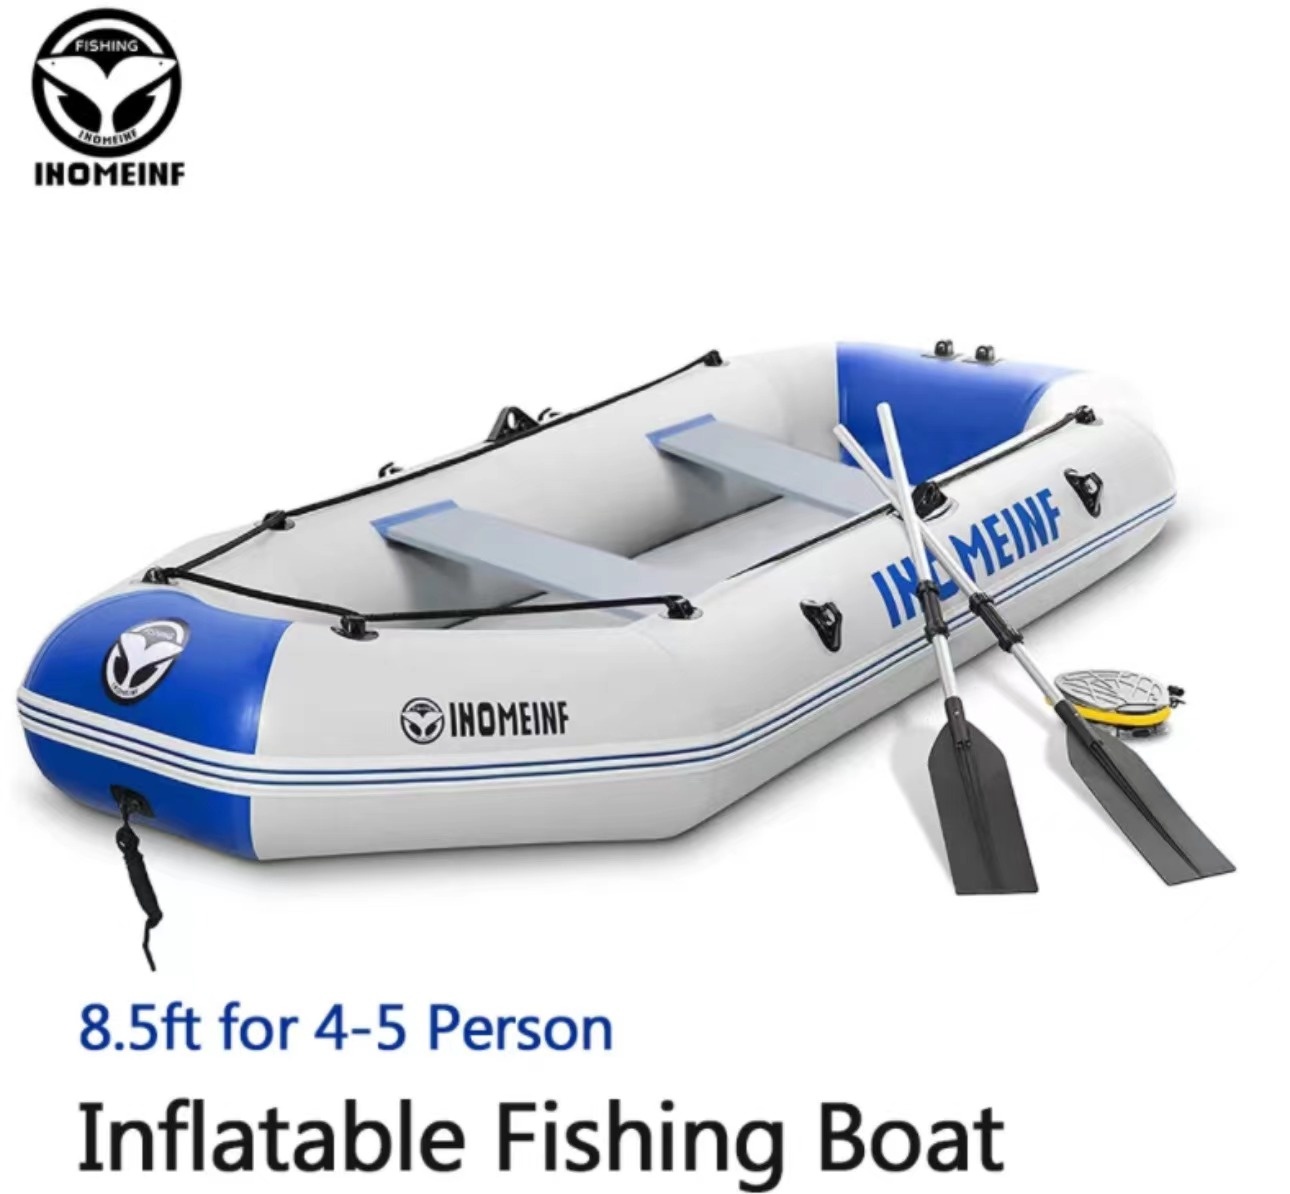 Hot Selling 260*128cm Inflatable Air Deck Fishing Boat PVC Durable for 4-5 persons inflatable fishing boat